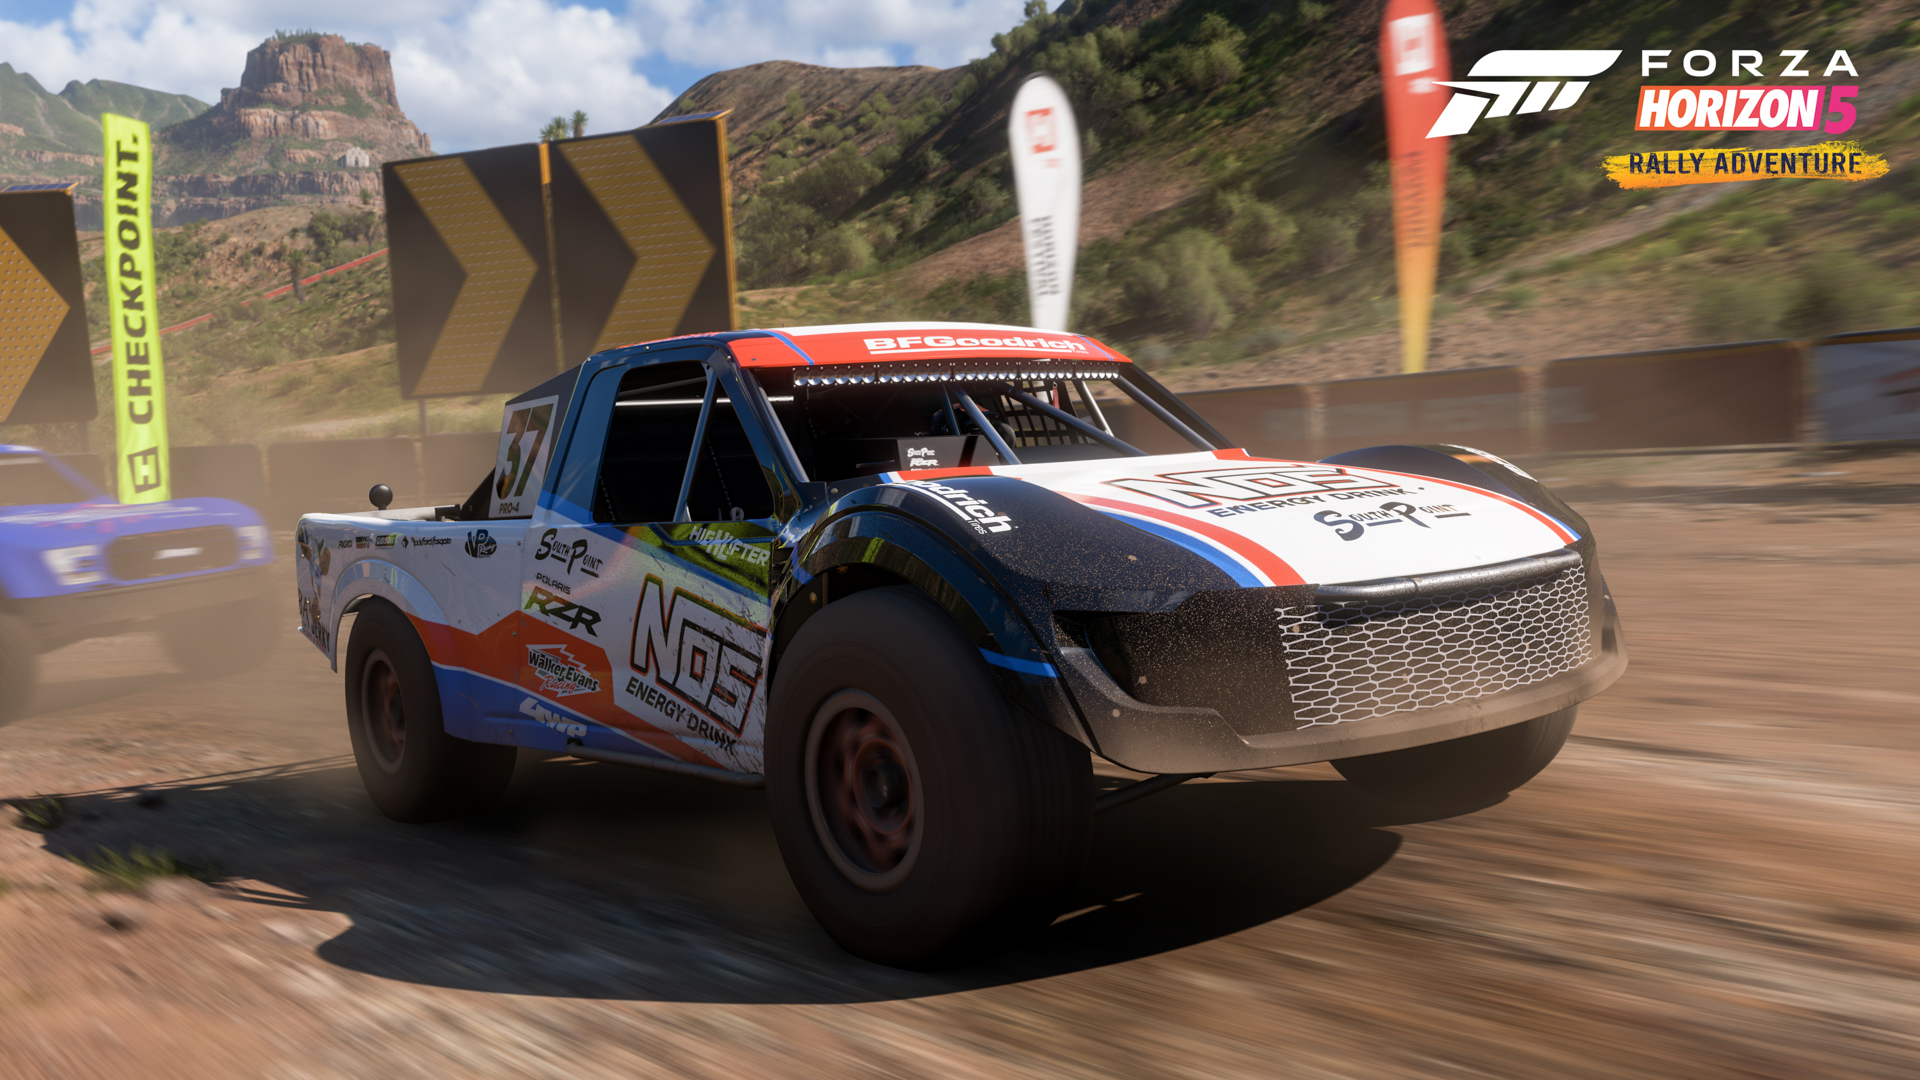 Forza Horizon 5's second expansion, Rally Adventure, will get dirty this  March